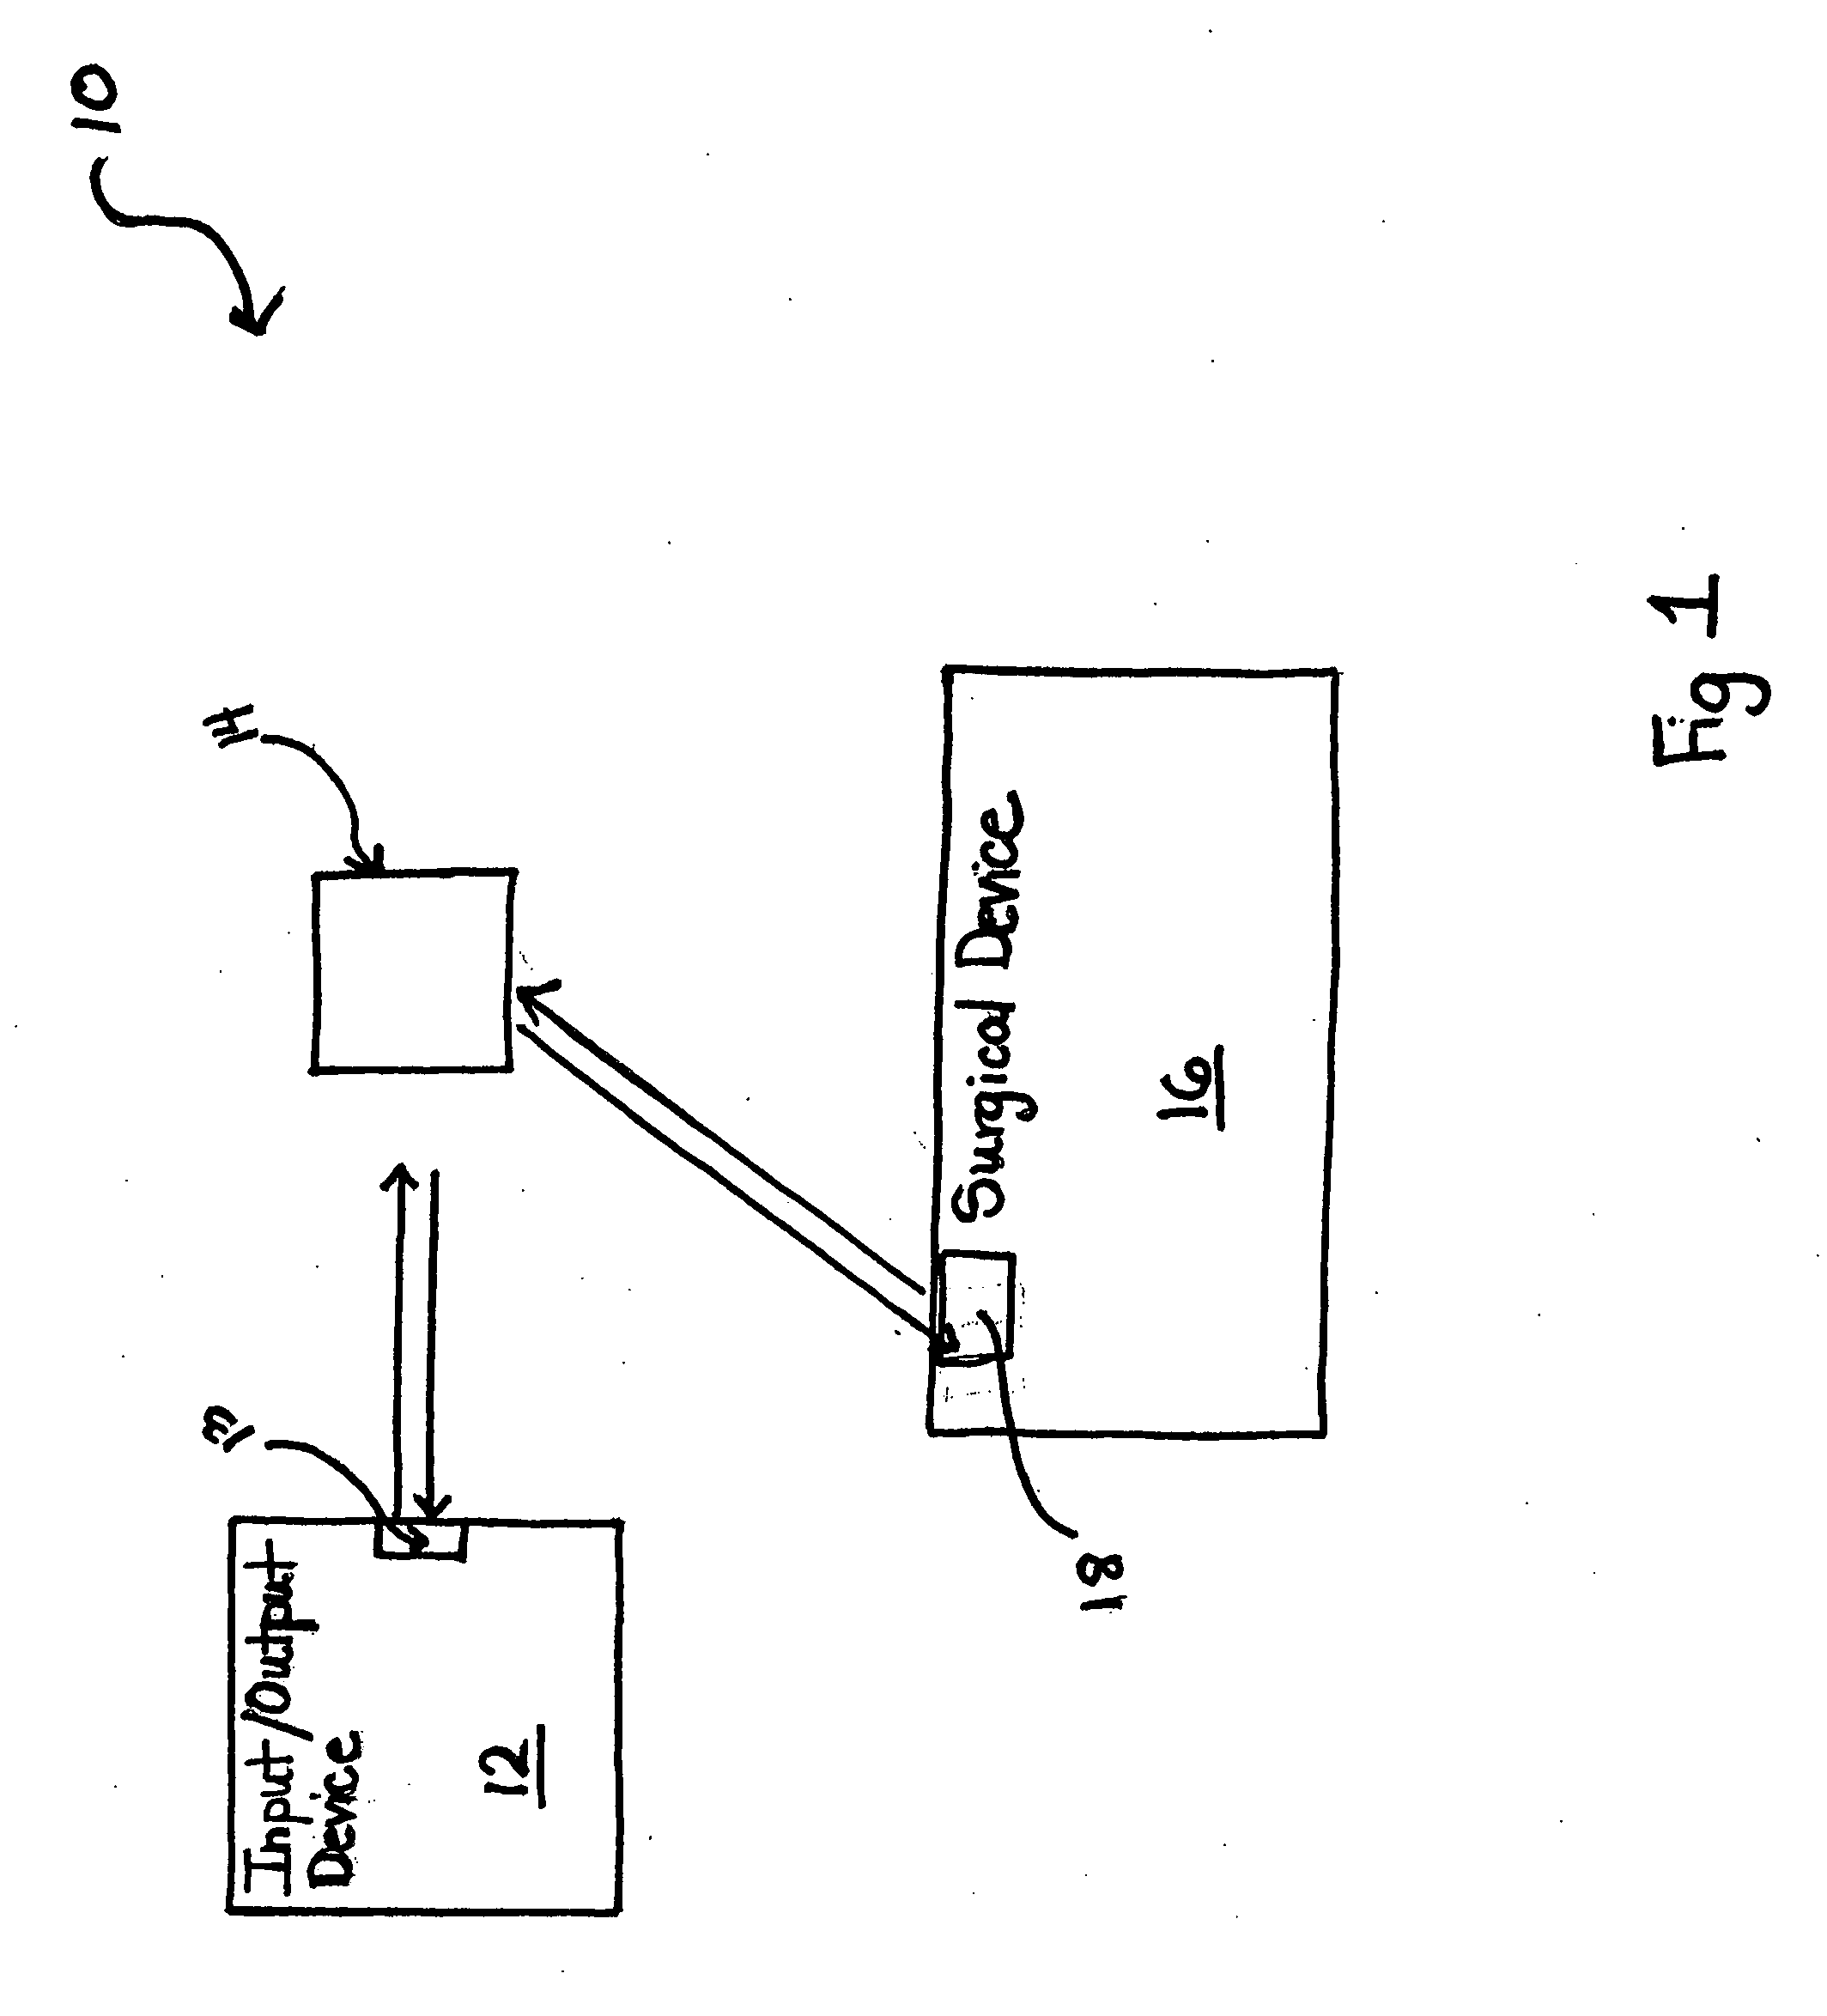 Method and system for configuring and data populating a surgical device